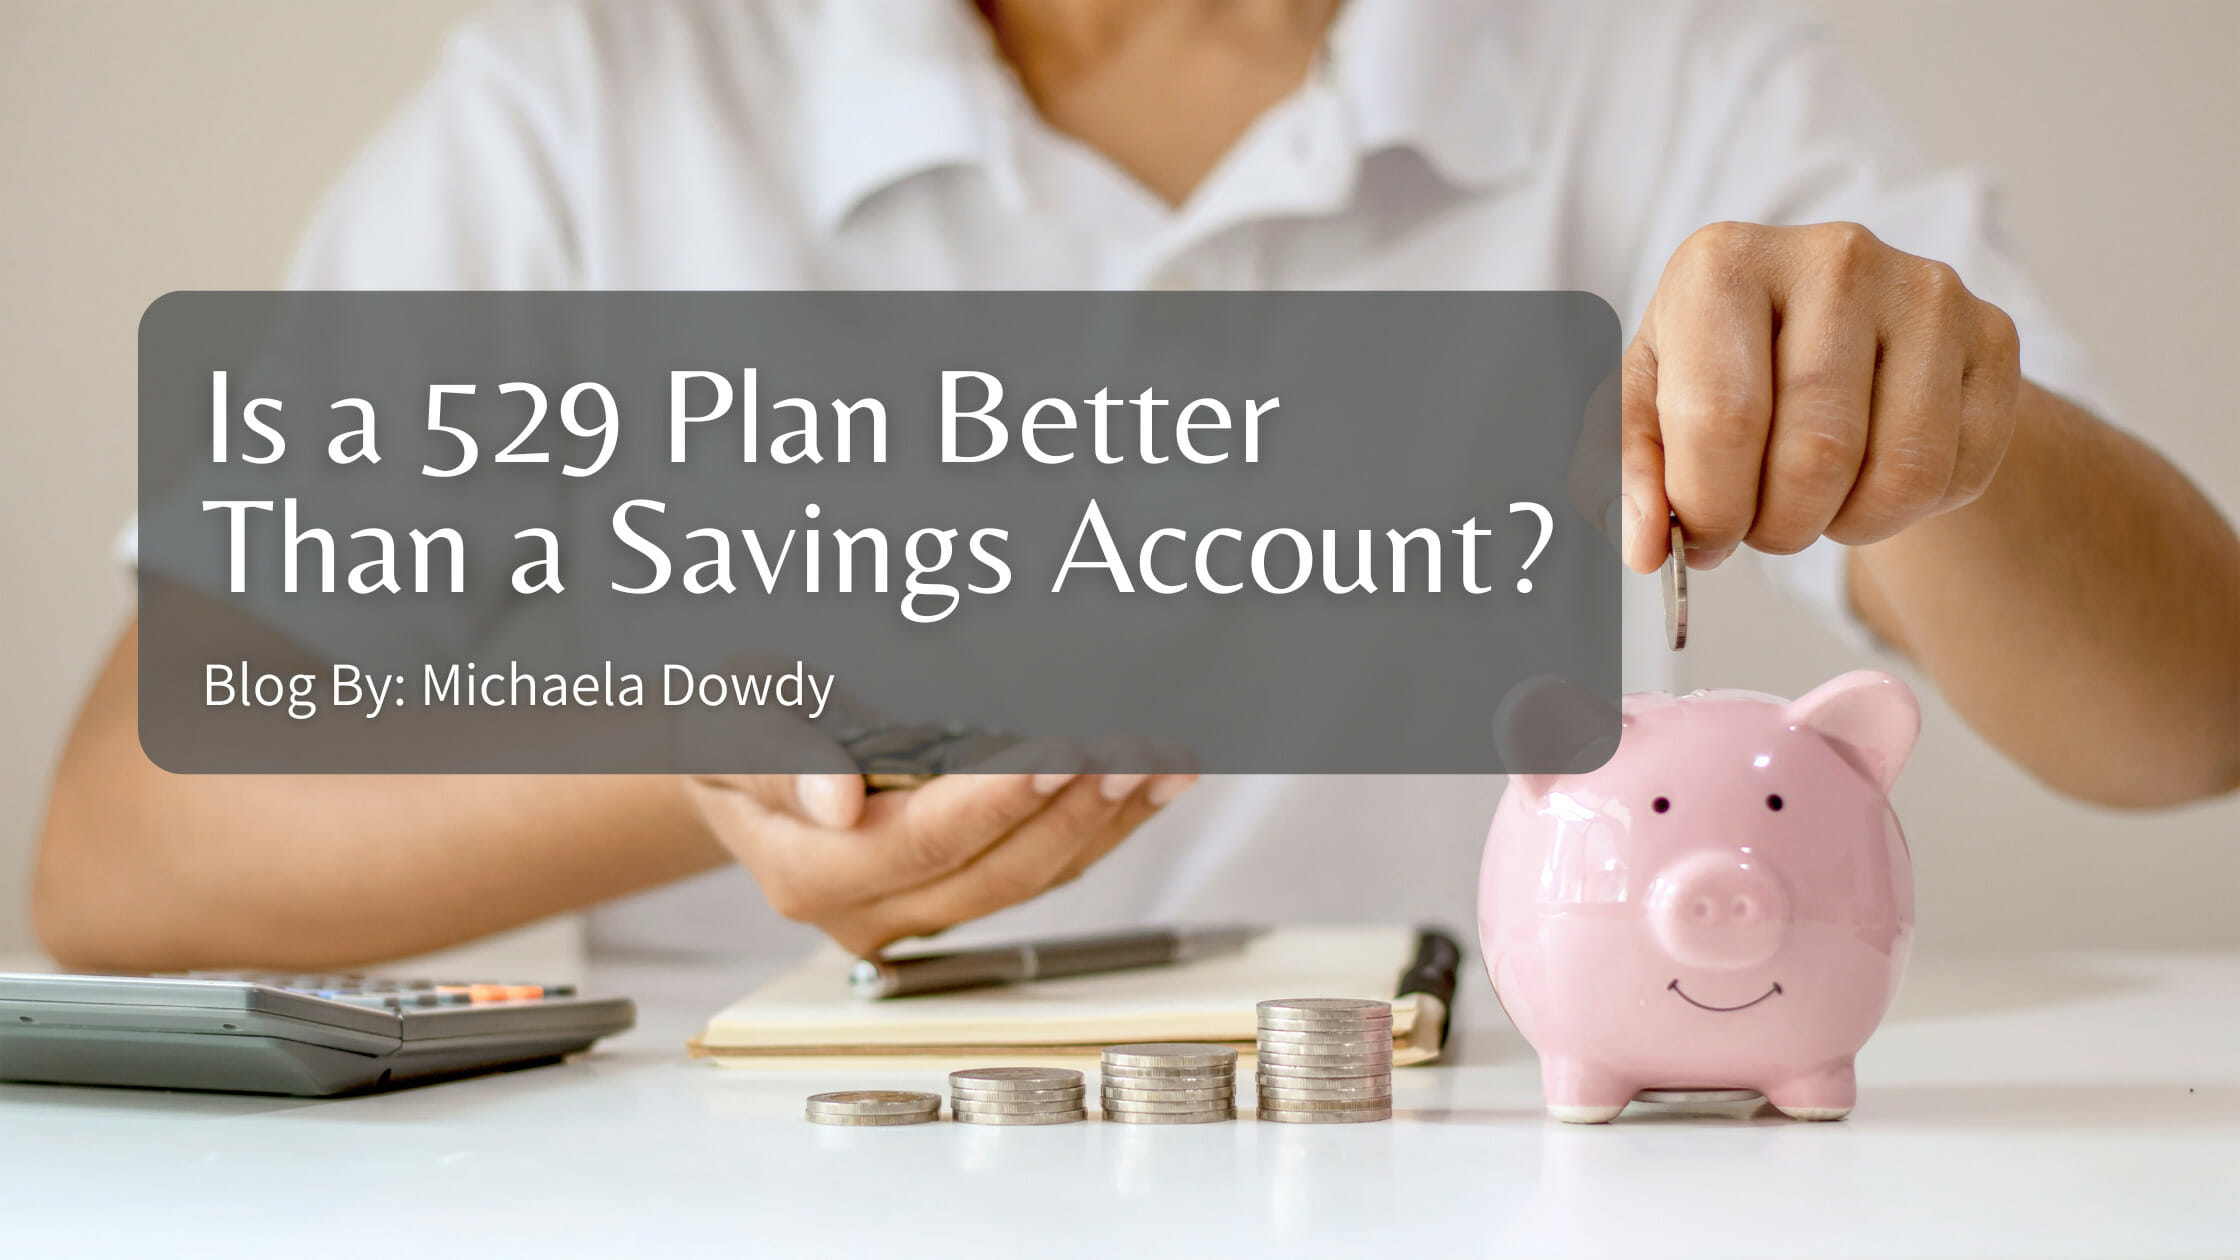 Is a 529 Plan Better Than a Savings Account?